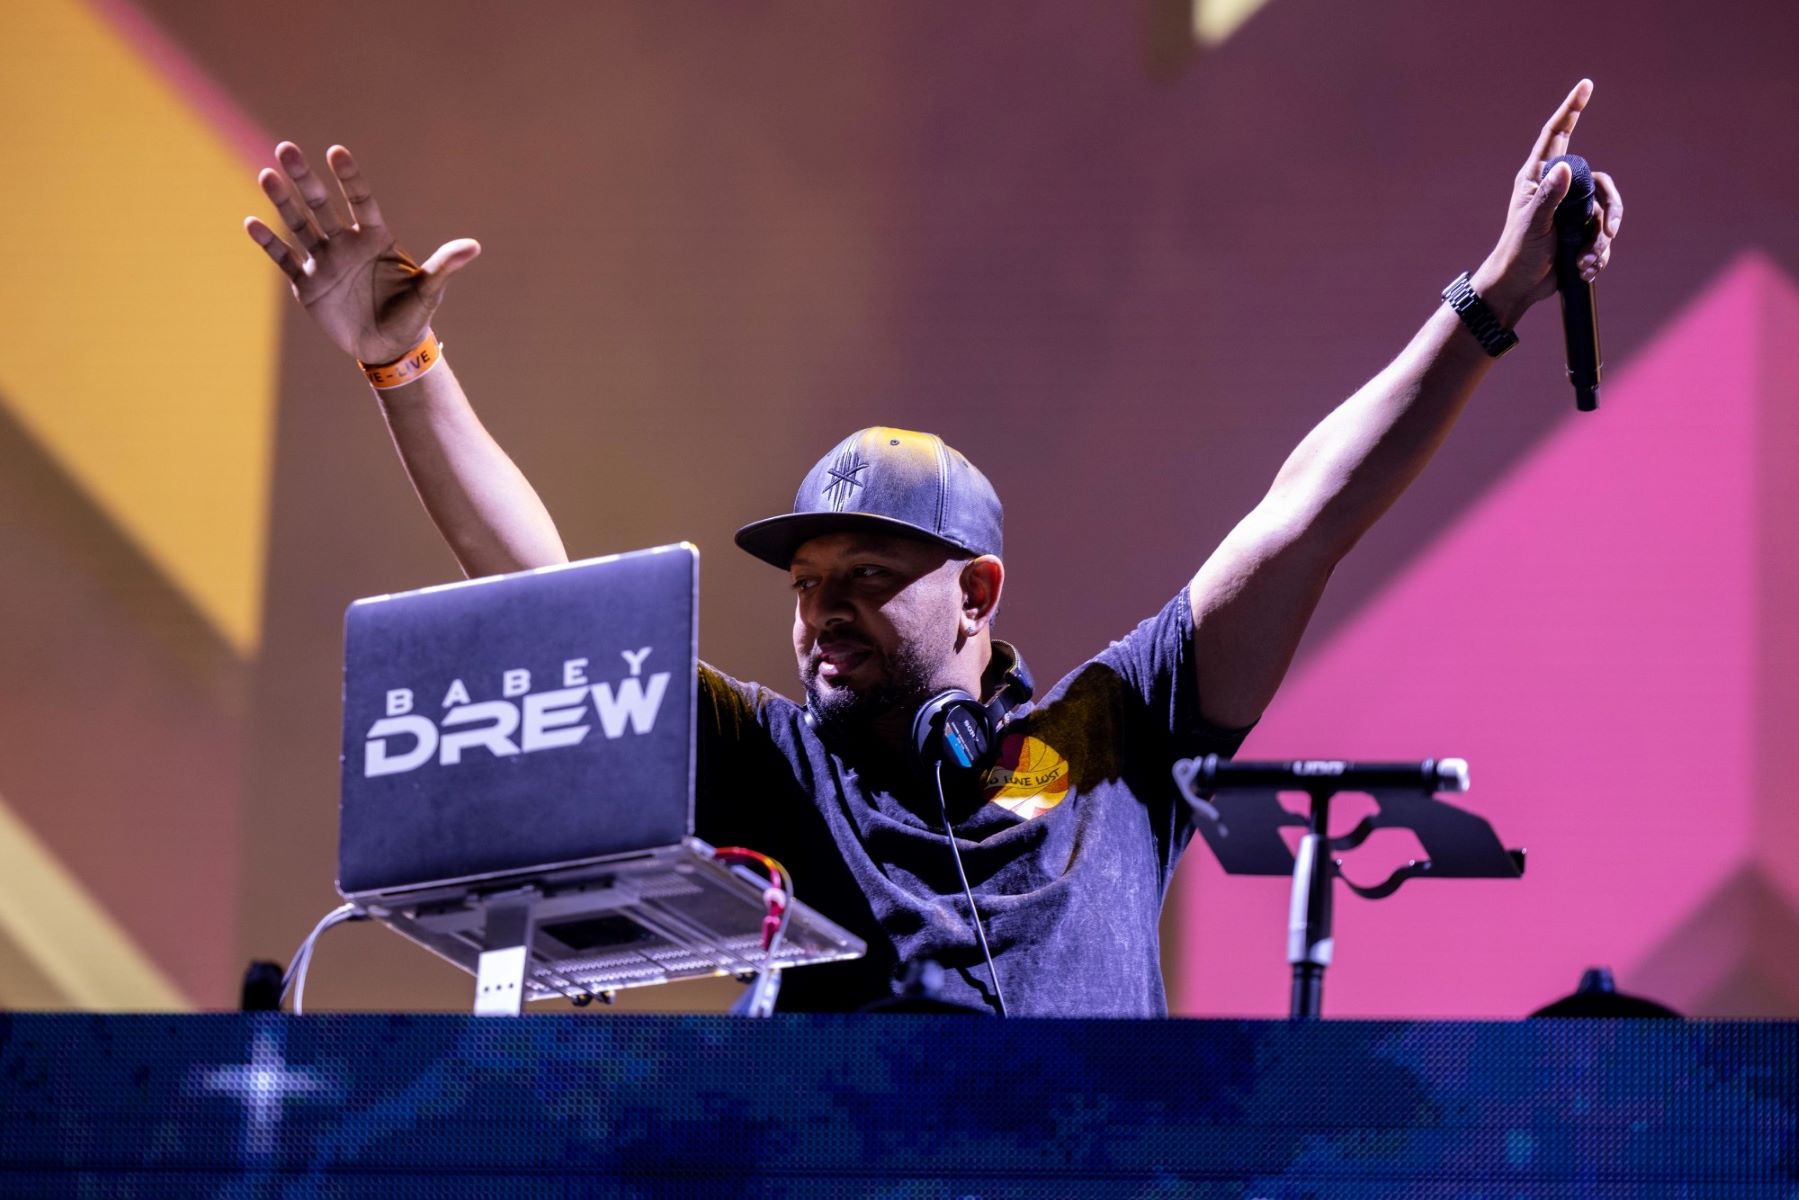 8-extraordinary-facts-about-dj-babey-drew